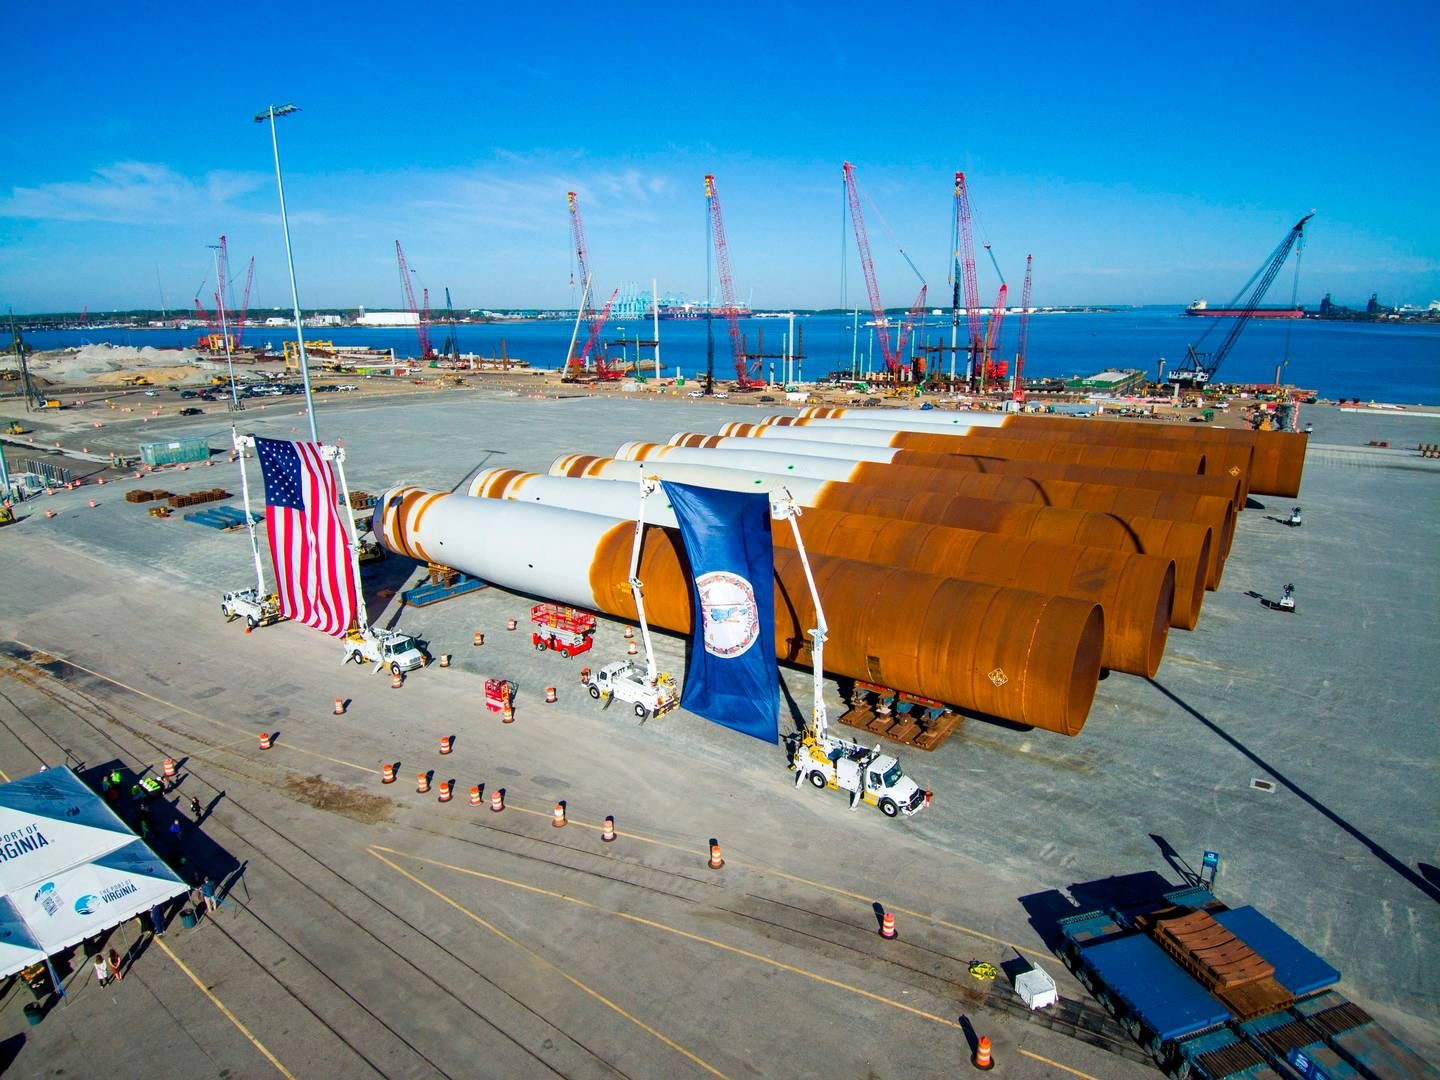 Last month, Dominion Energy received the first monopiles from EEW for its 2.6 GW Coastal Virginia project. It is on schedule and on budget, the company states. | Photo: Handout